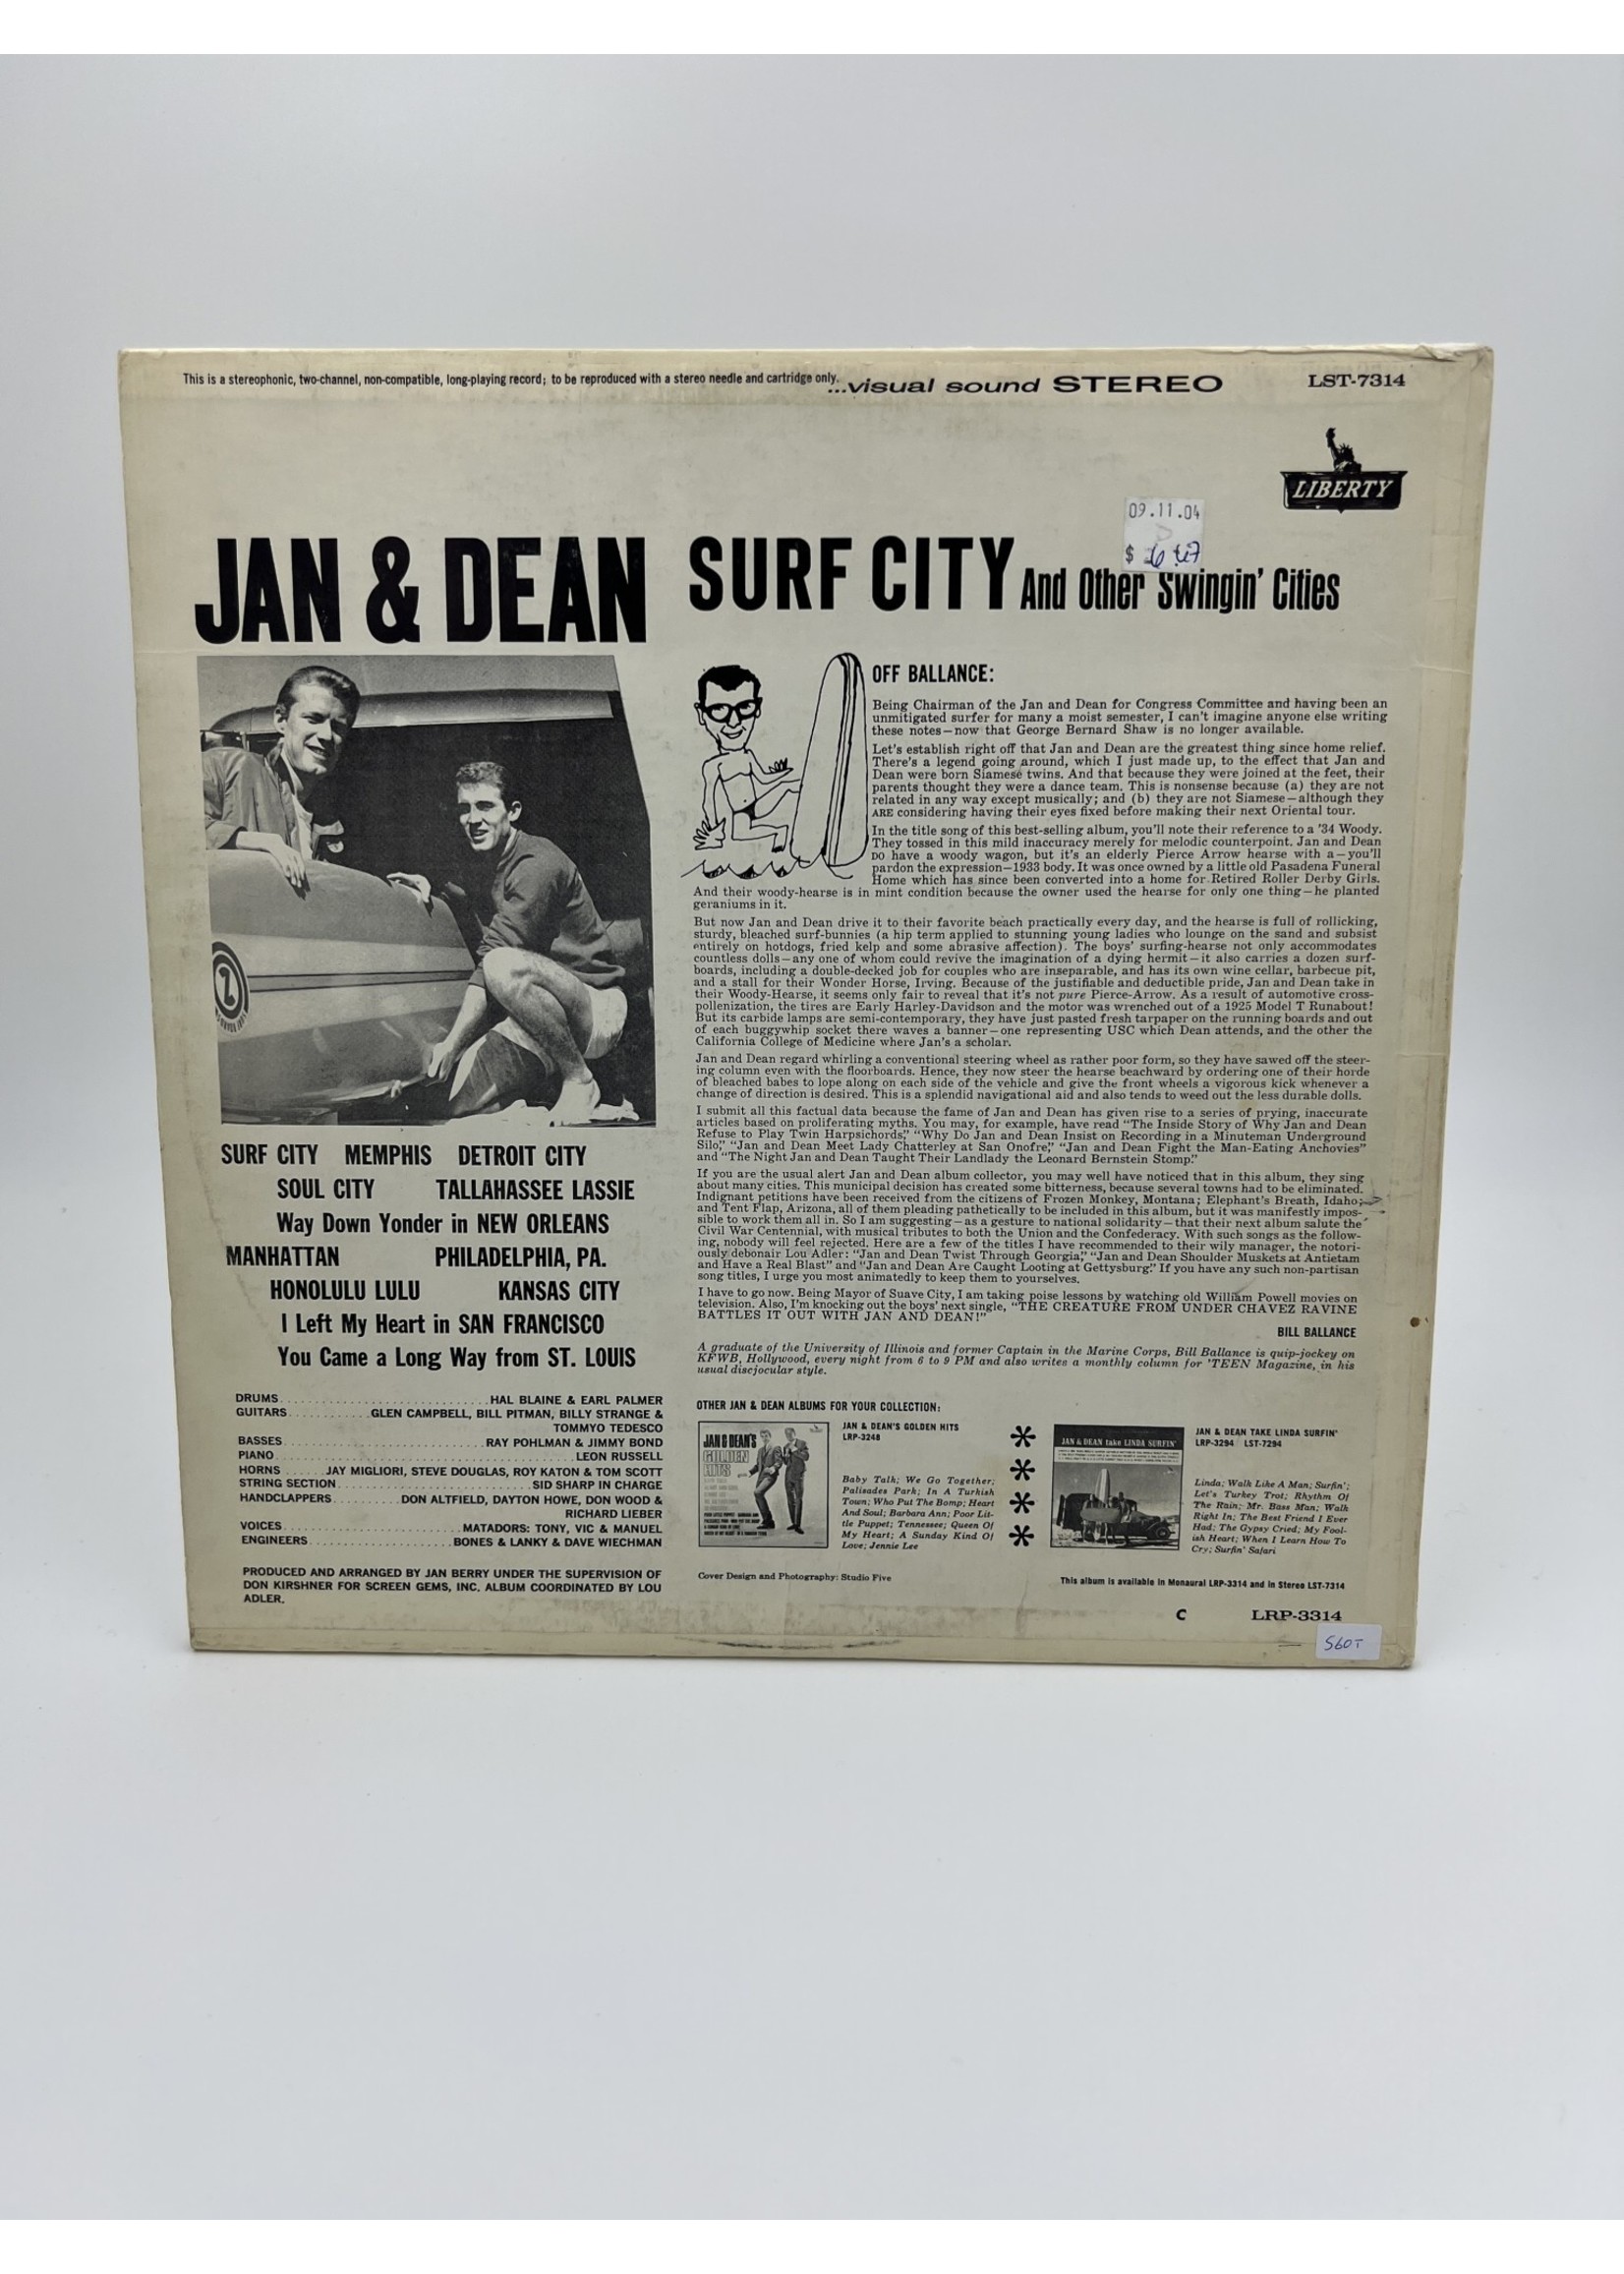 LP Jan And Dean Surf City And Other Swingin Cities LP RECORD